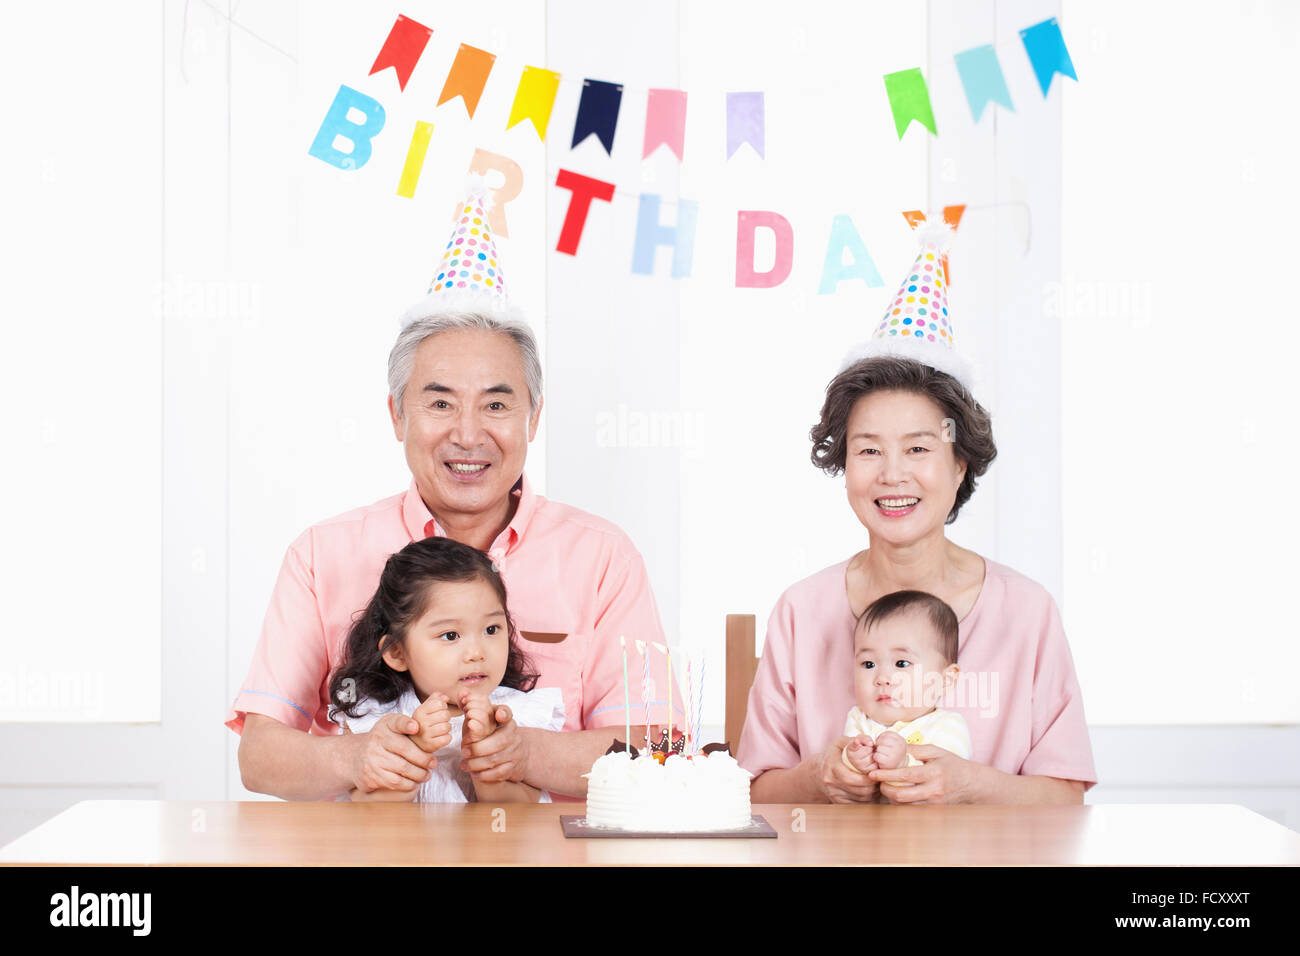 Portrait of old couple with thier grandchidren at birthday party Stock Photo